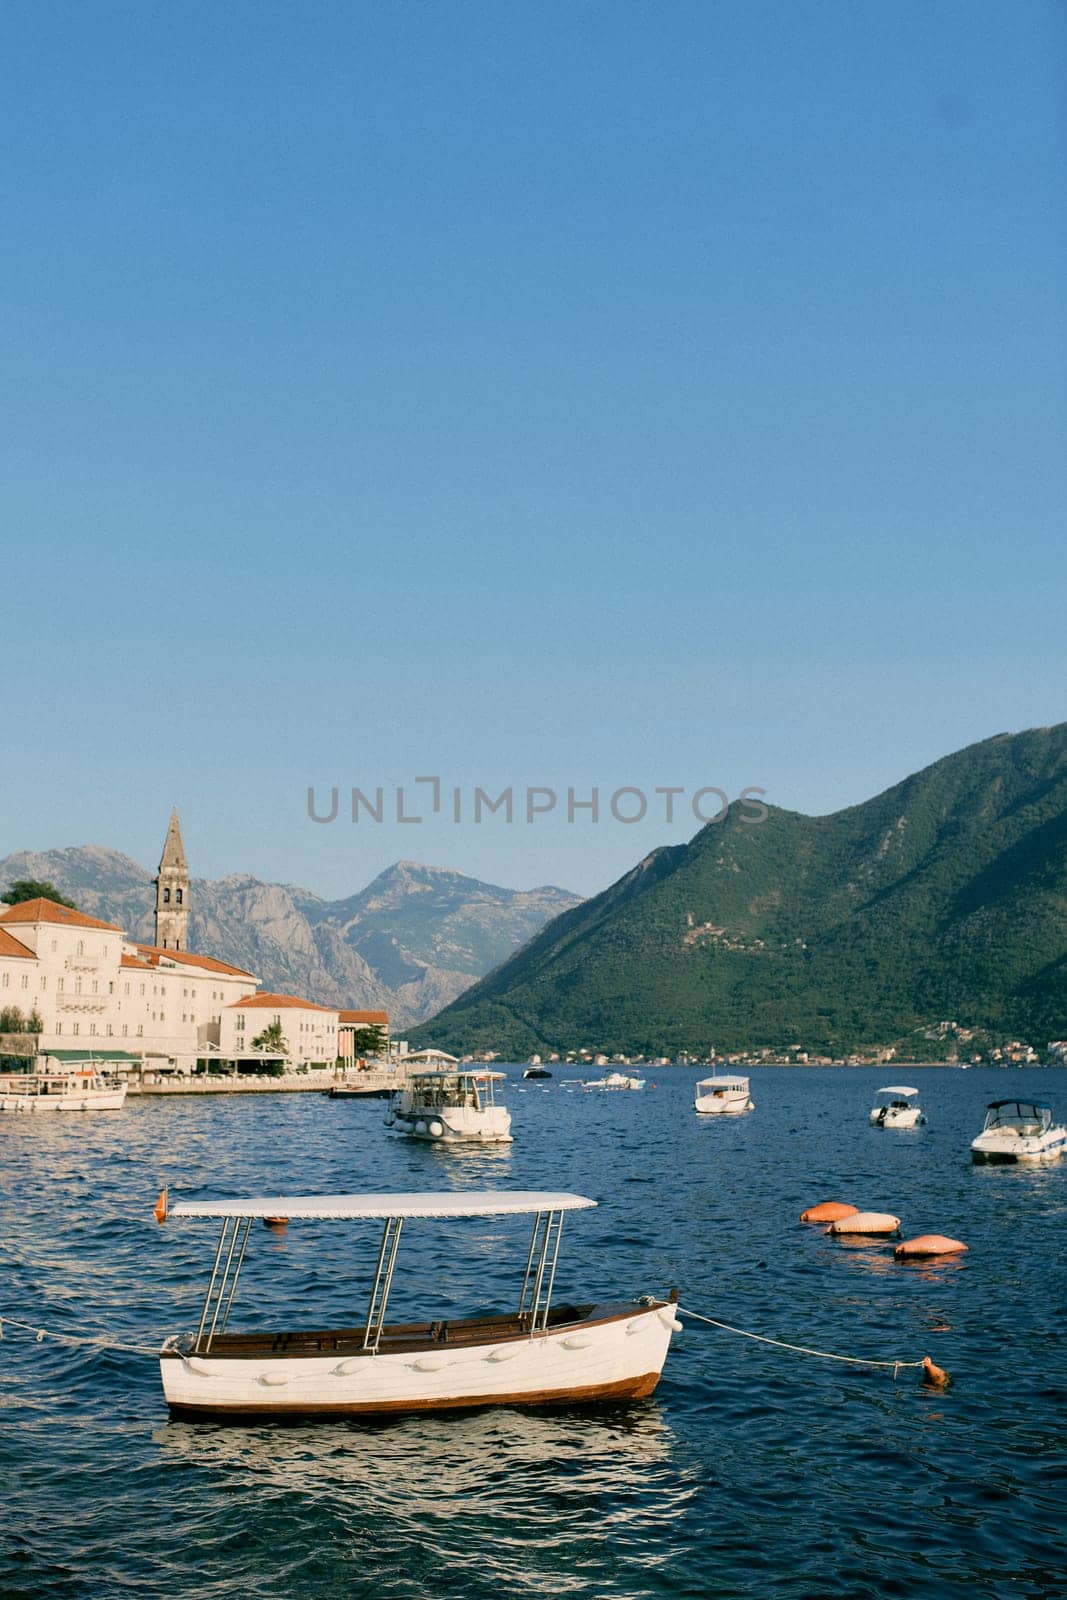 Small excursion boats are moored in the sea off the coast of Perast. Montenegro by Nadtochiy